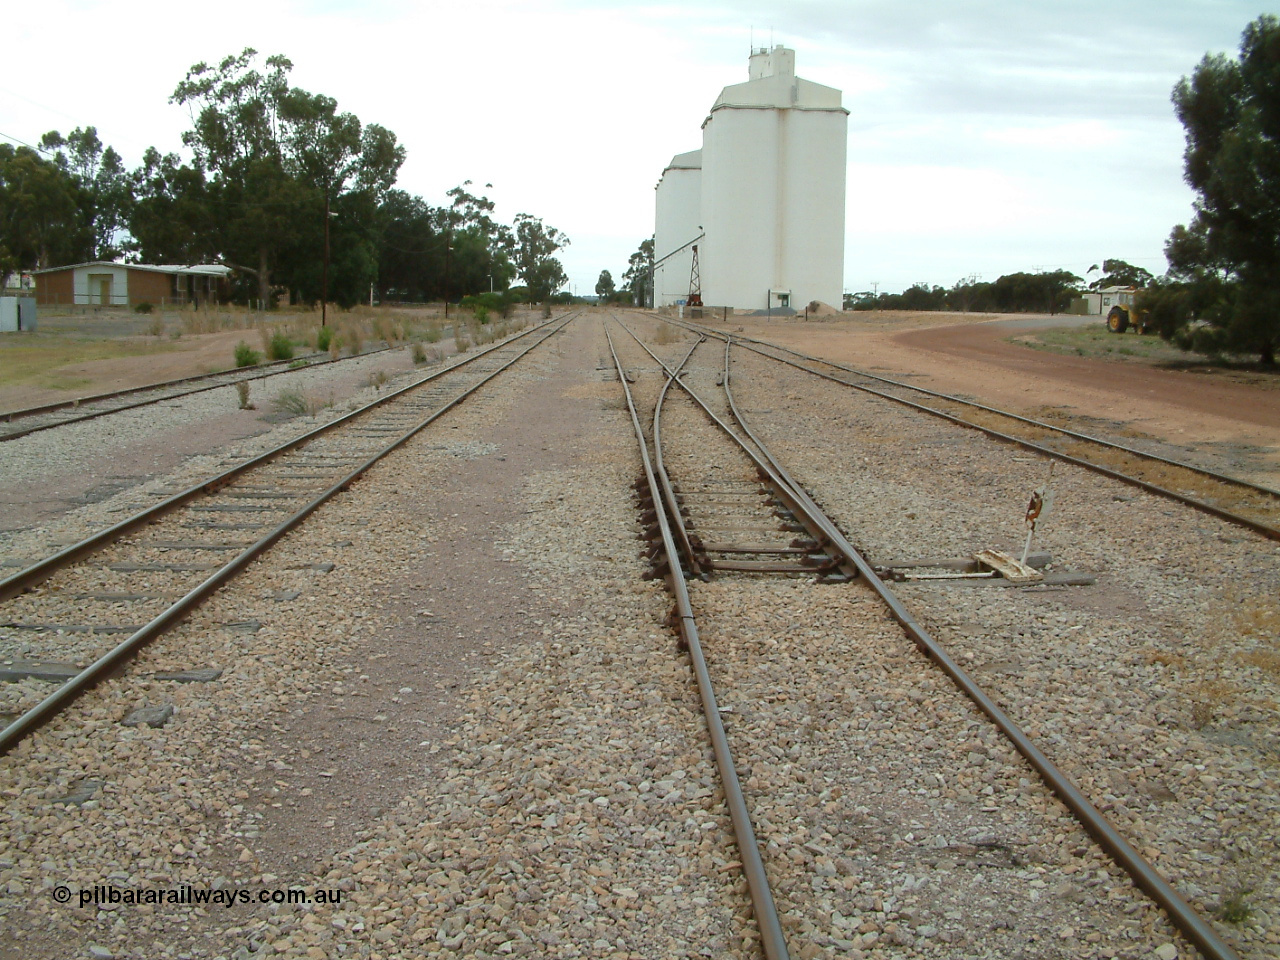 030407 094734
Minnipa, yard overview looking south, tracks from the left, No. 1 Goods Siding, Mainline, No.2 Goods Siding and No. 3 Goods Siding. Crew barracks visible on the left, rotating jib crane visible in front of concrete silo complexes. 7th April 2003.
